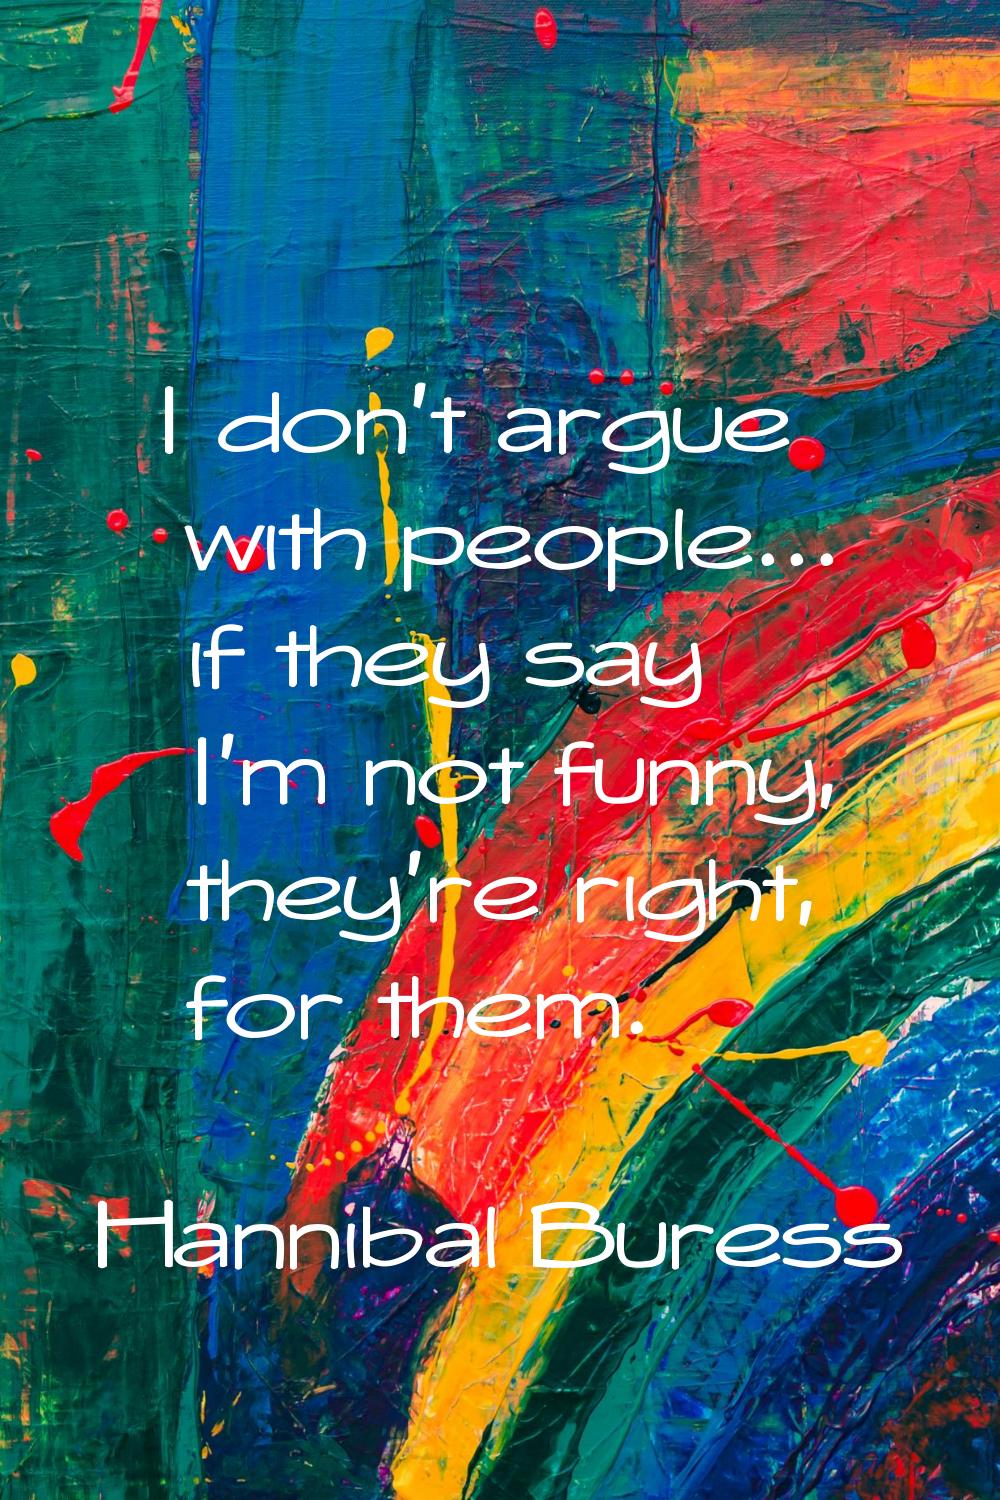 I don't argue with people... if they say I'm not funny, they're right, for them.